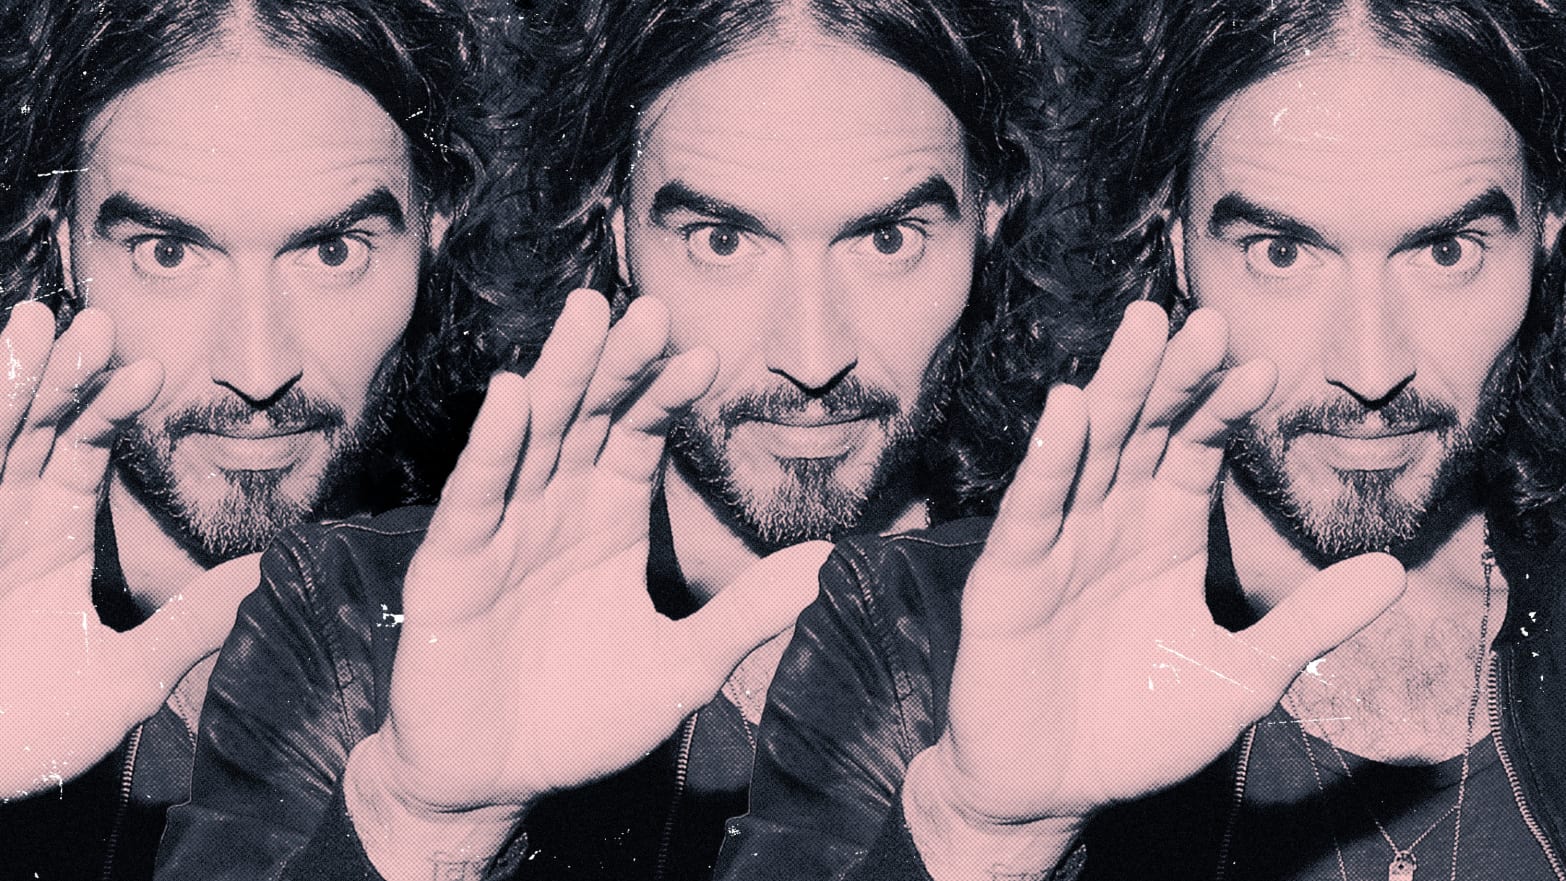 A triptych of Russell Brand with his arm extending out to the audience